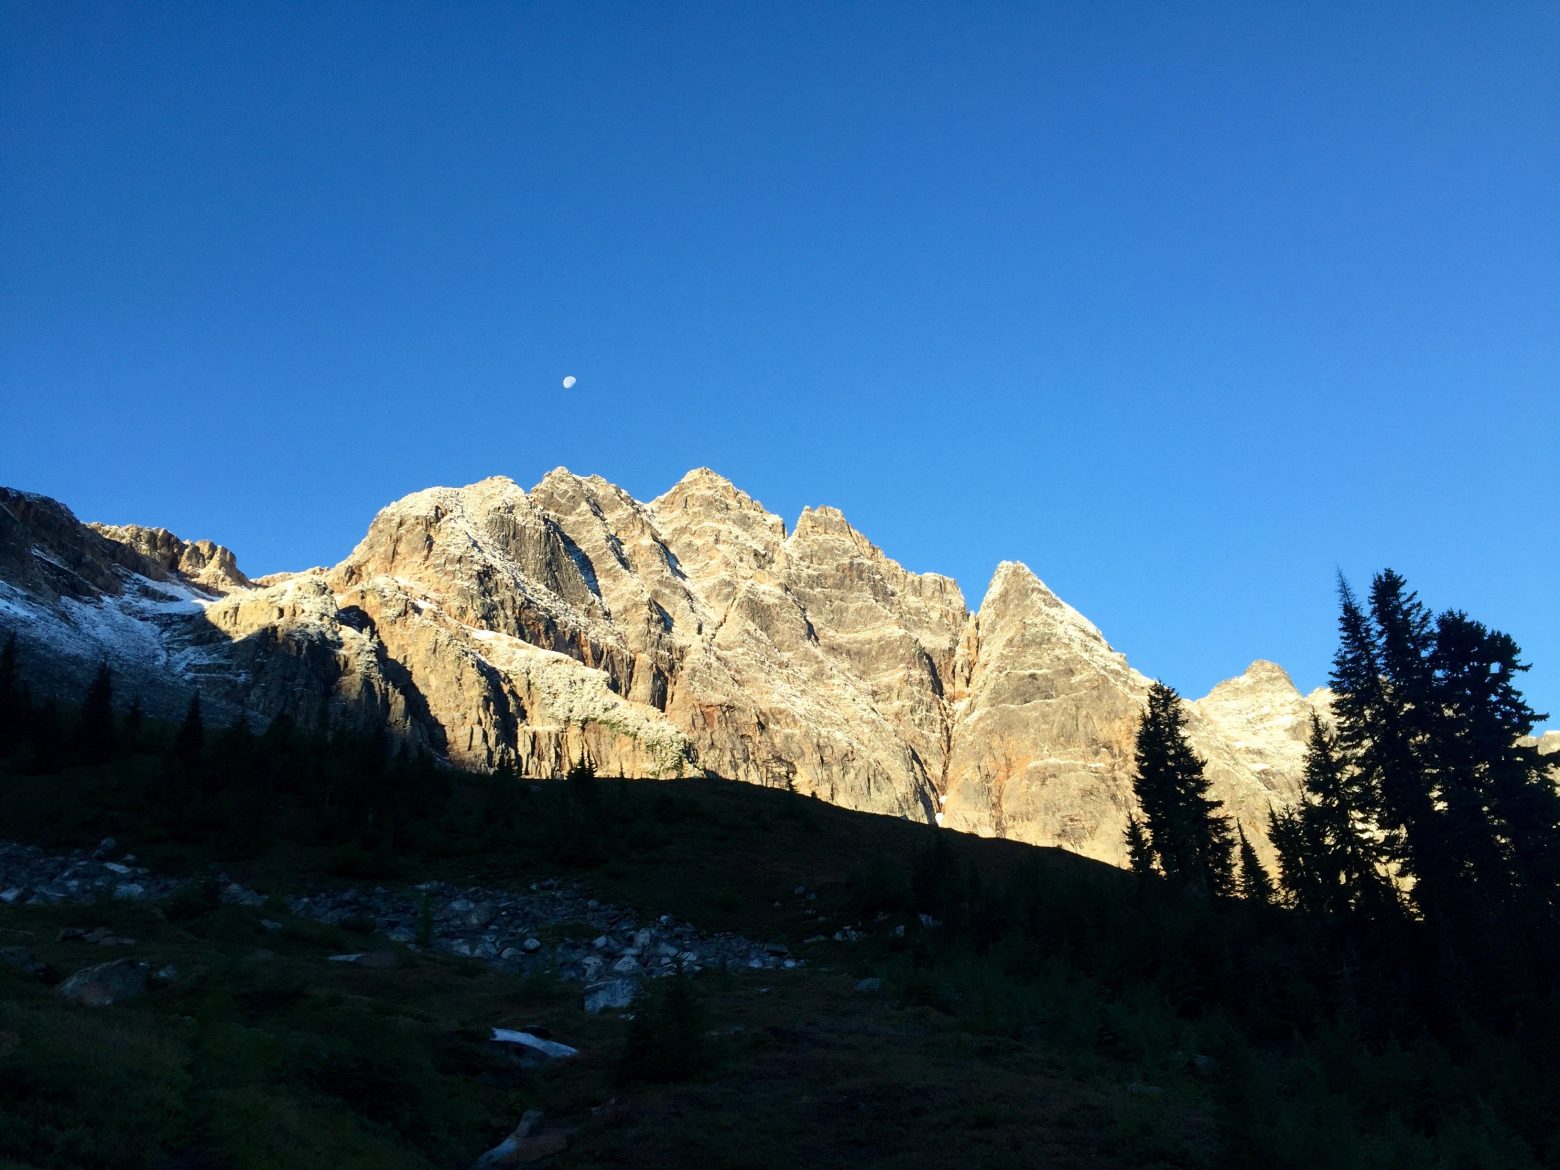 Blue sky behind jagged peak lit by the morning sun